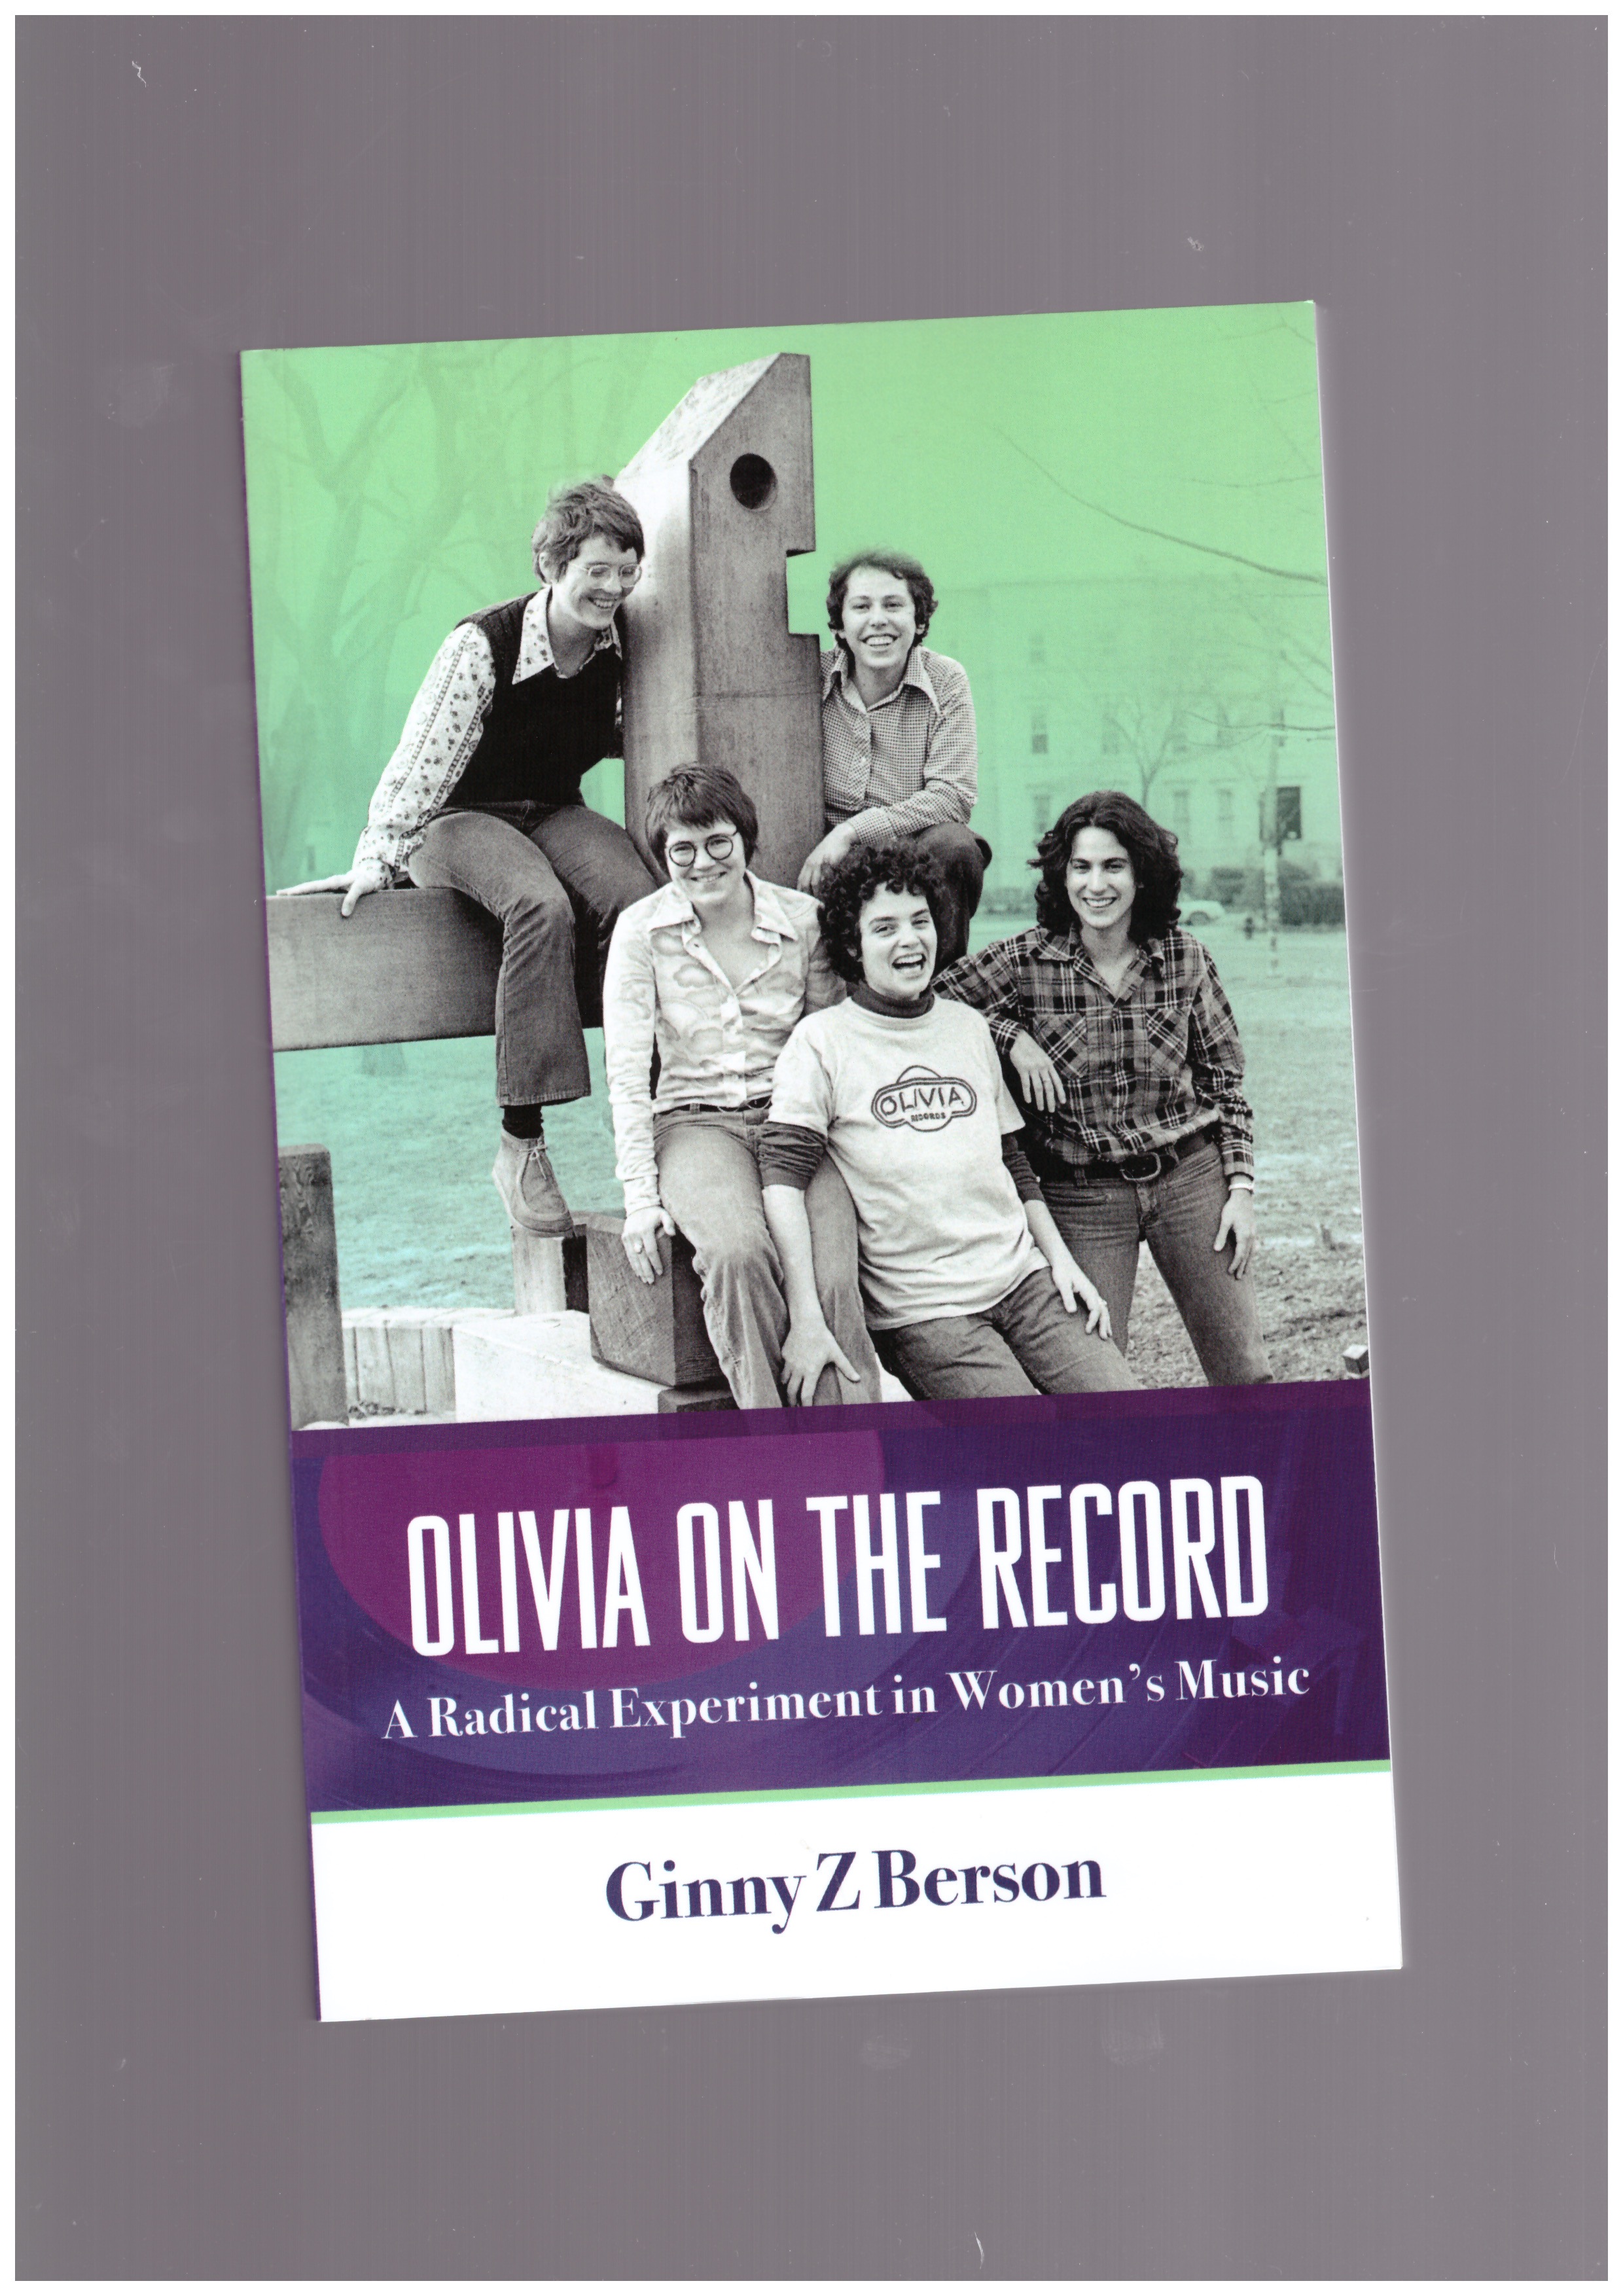 BERSON Z, Ginny - Olivia on the Record